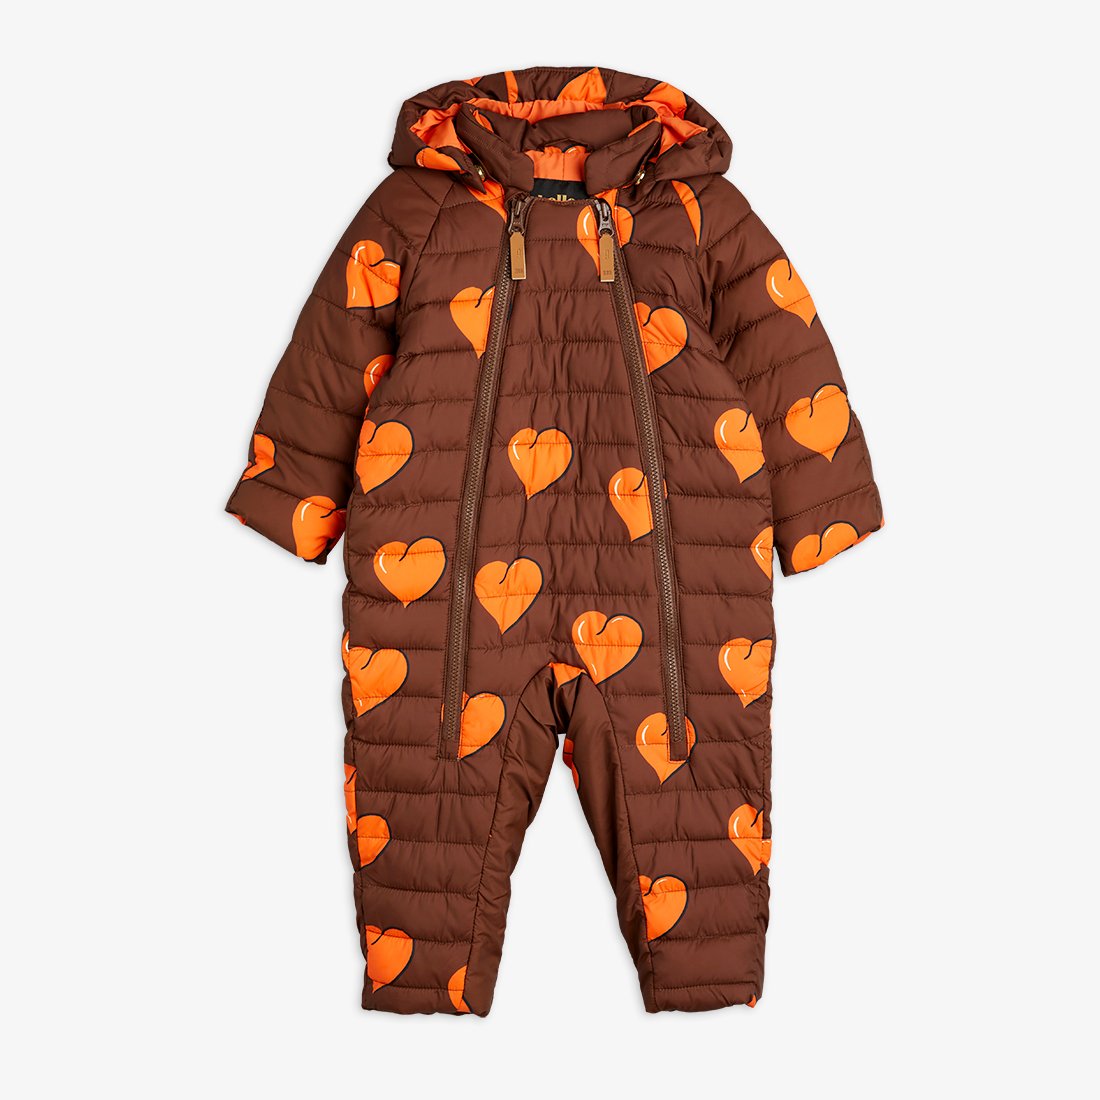 Hearts insulator baby overall - Brown